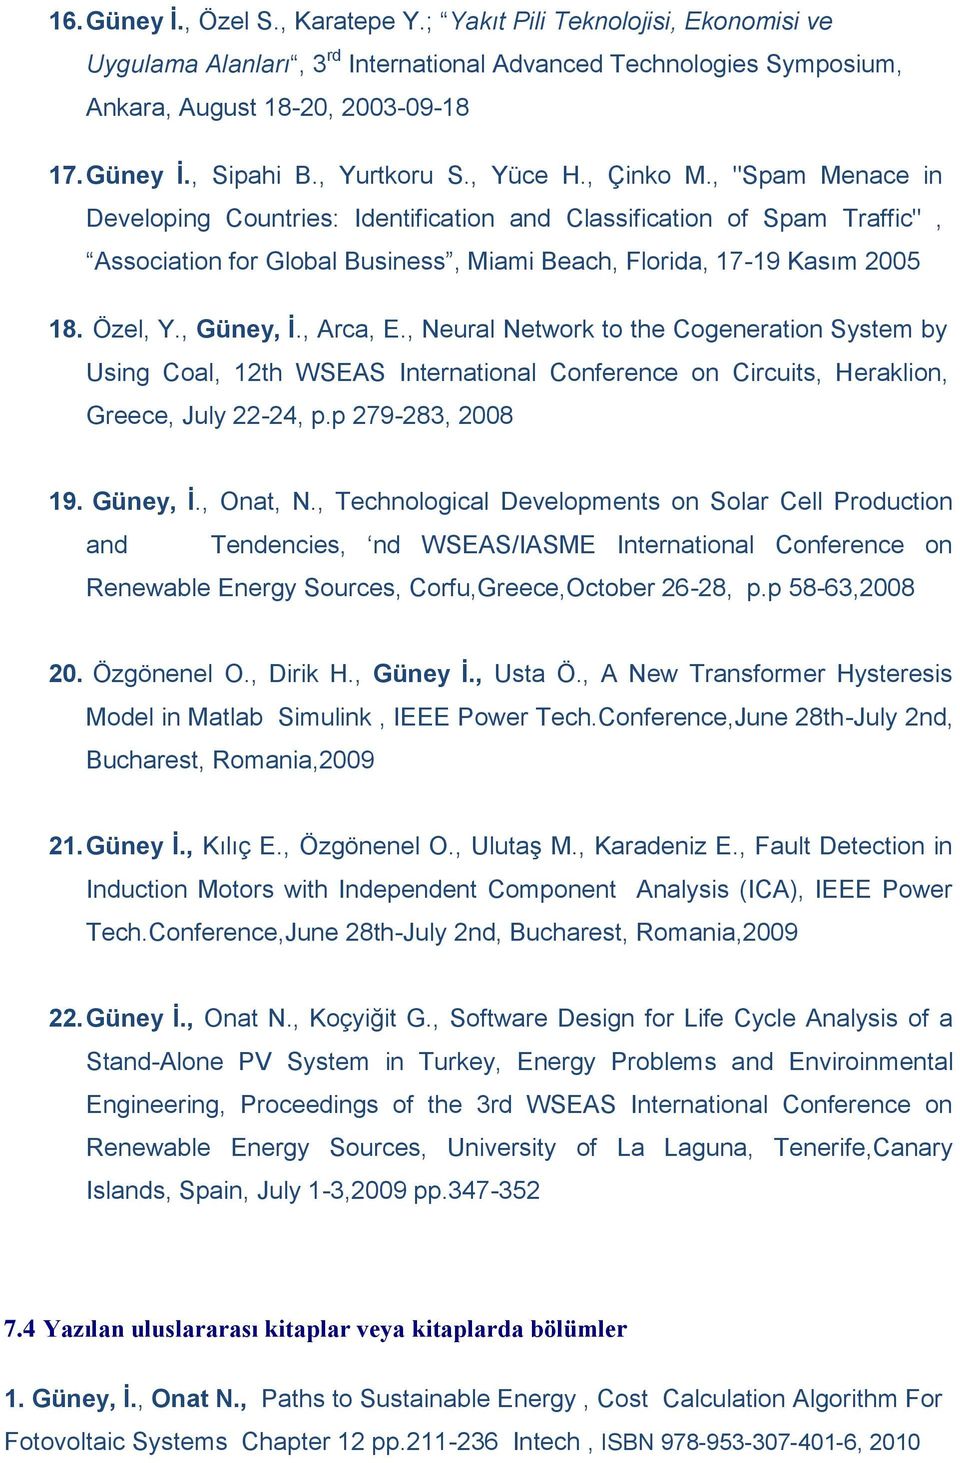 Özel, Y., Güney, İ., Arca, E., Neural Network to the Cogeneration System by Using Coal, 12th WSEAS International Conference on Circuits, Heraklion, Greece, July 22-24, p.p 279-283, 2008 19. Güney, İ., Onat, N.